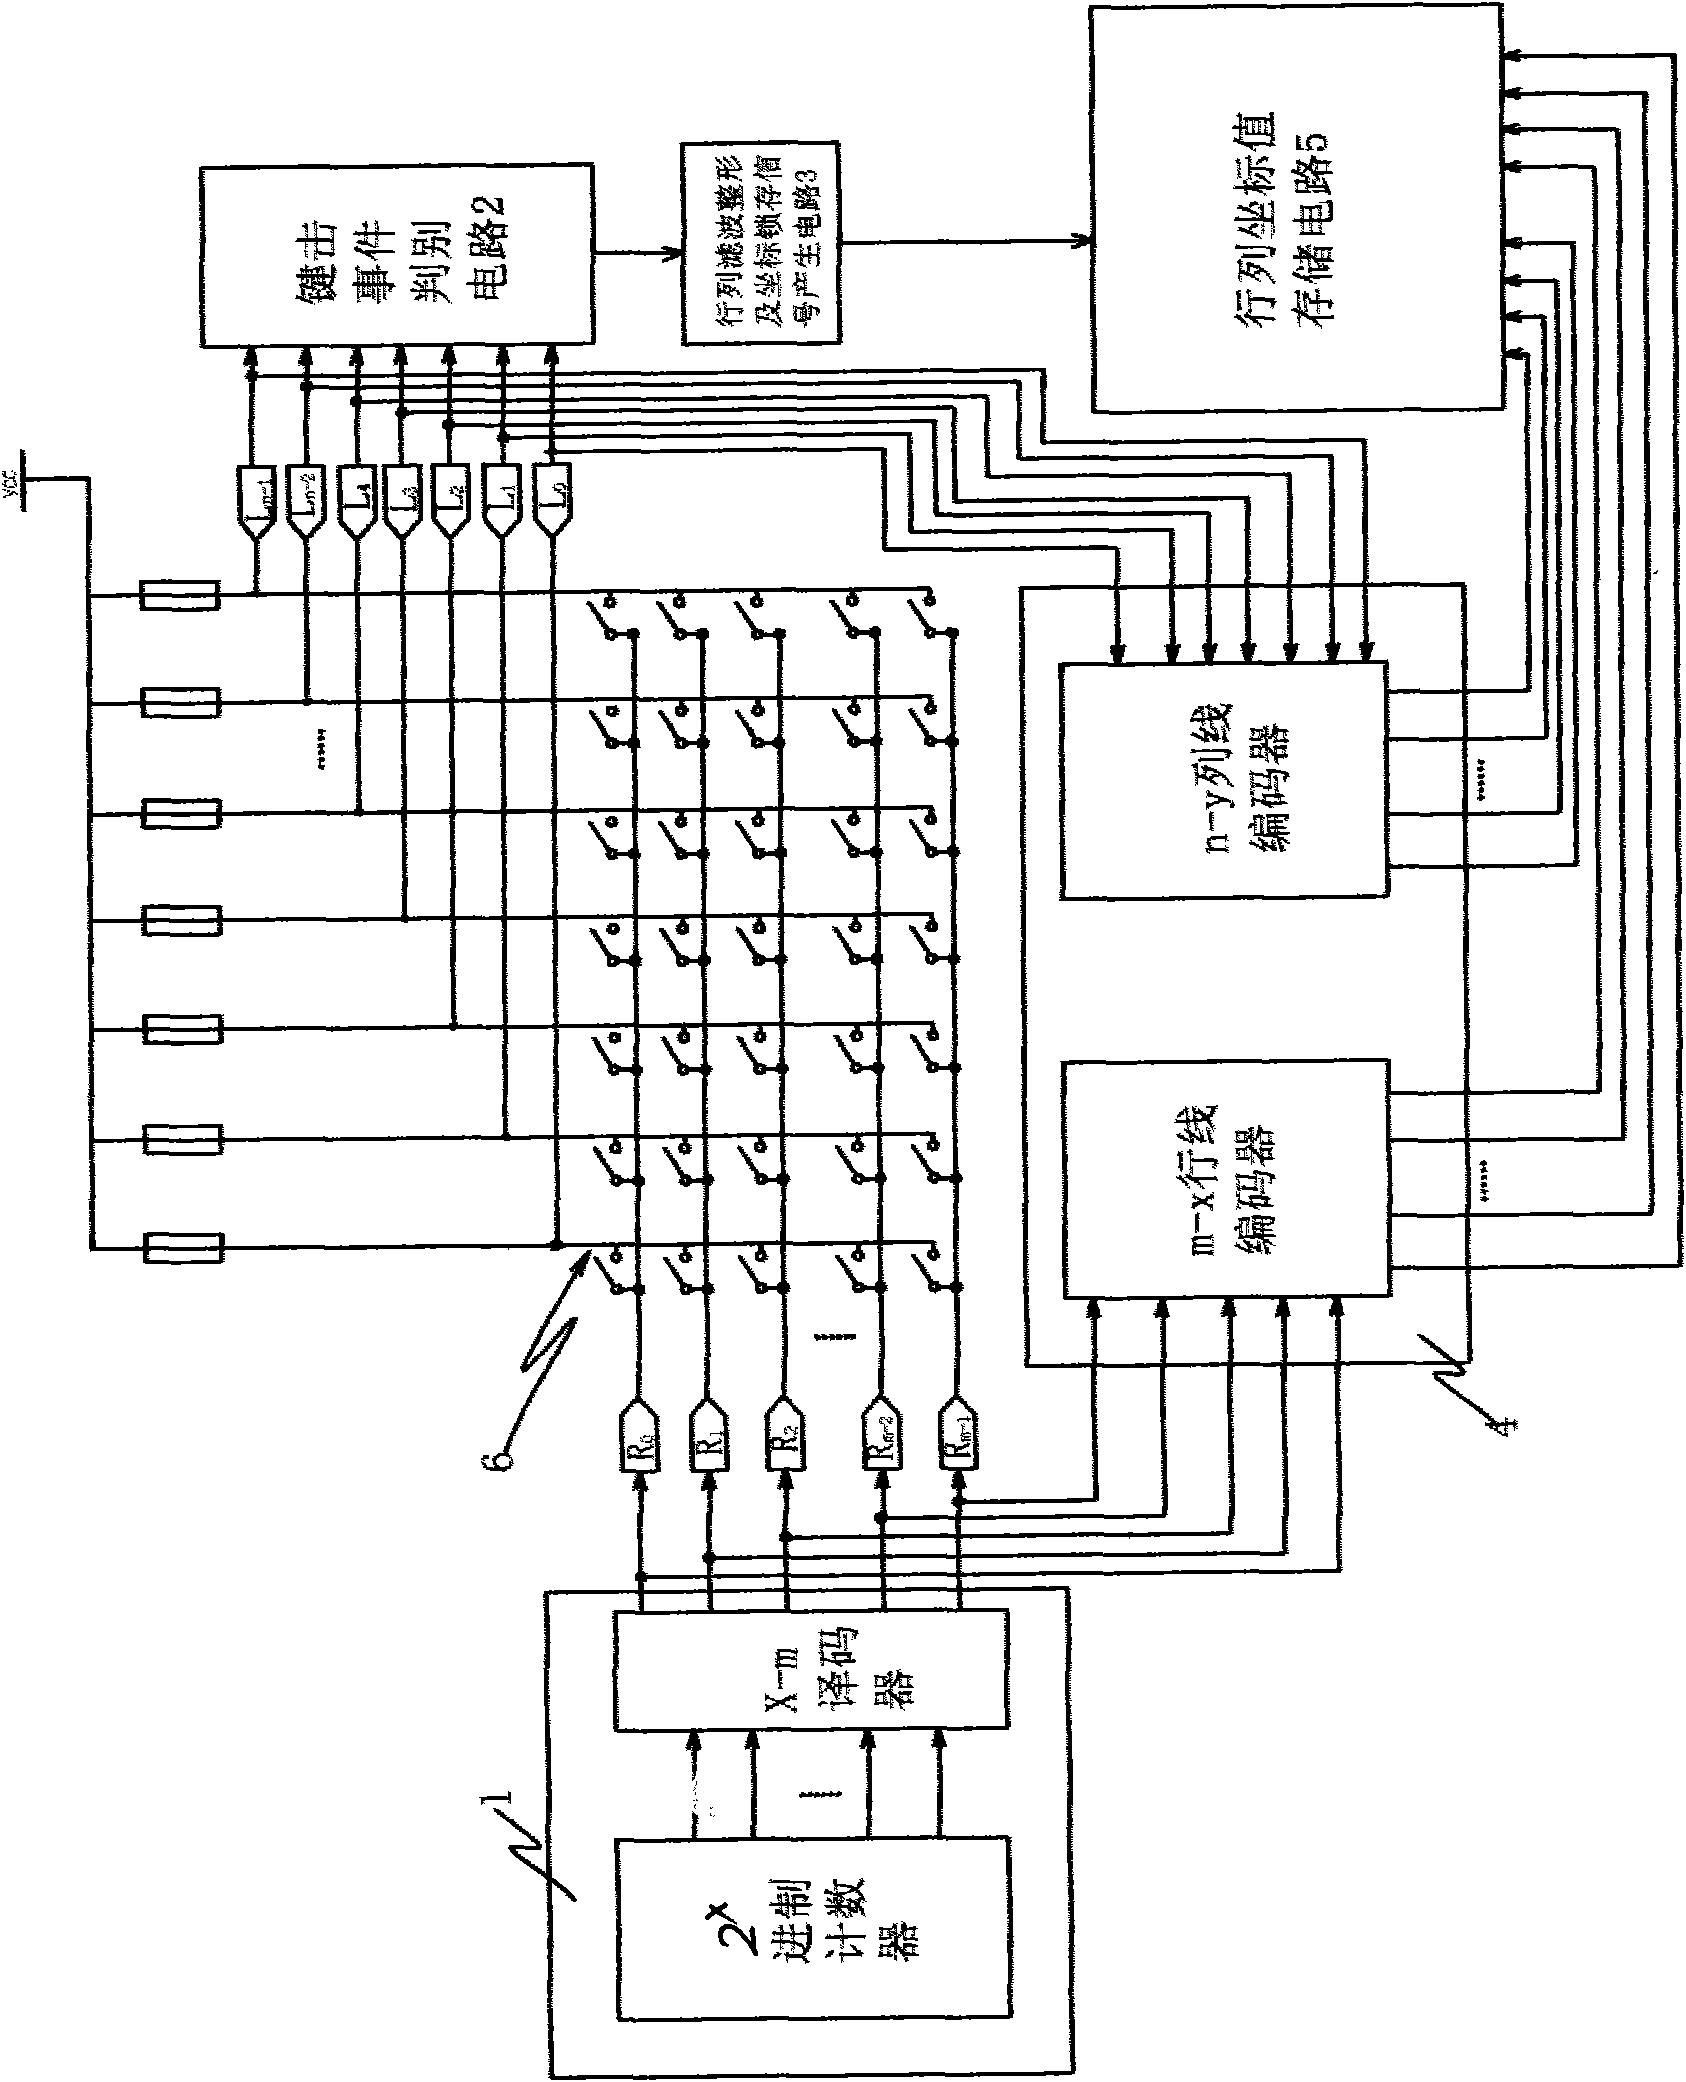 Determinant linear array coordinate scanning circuit